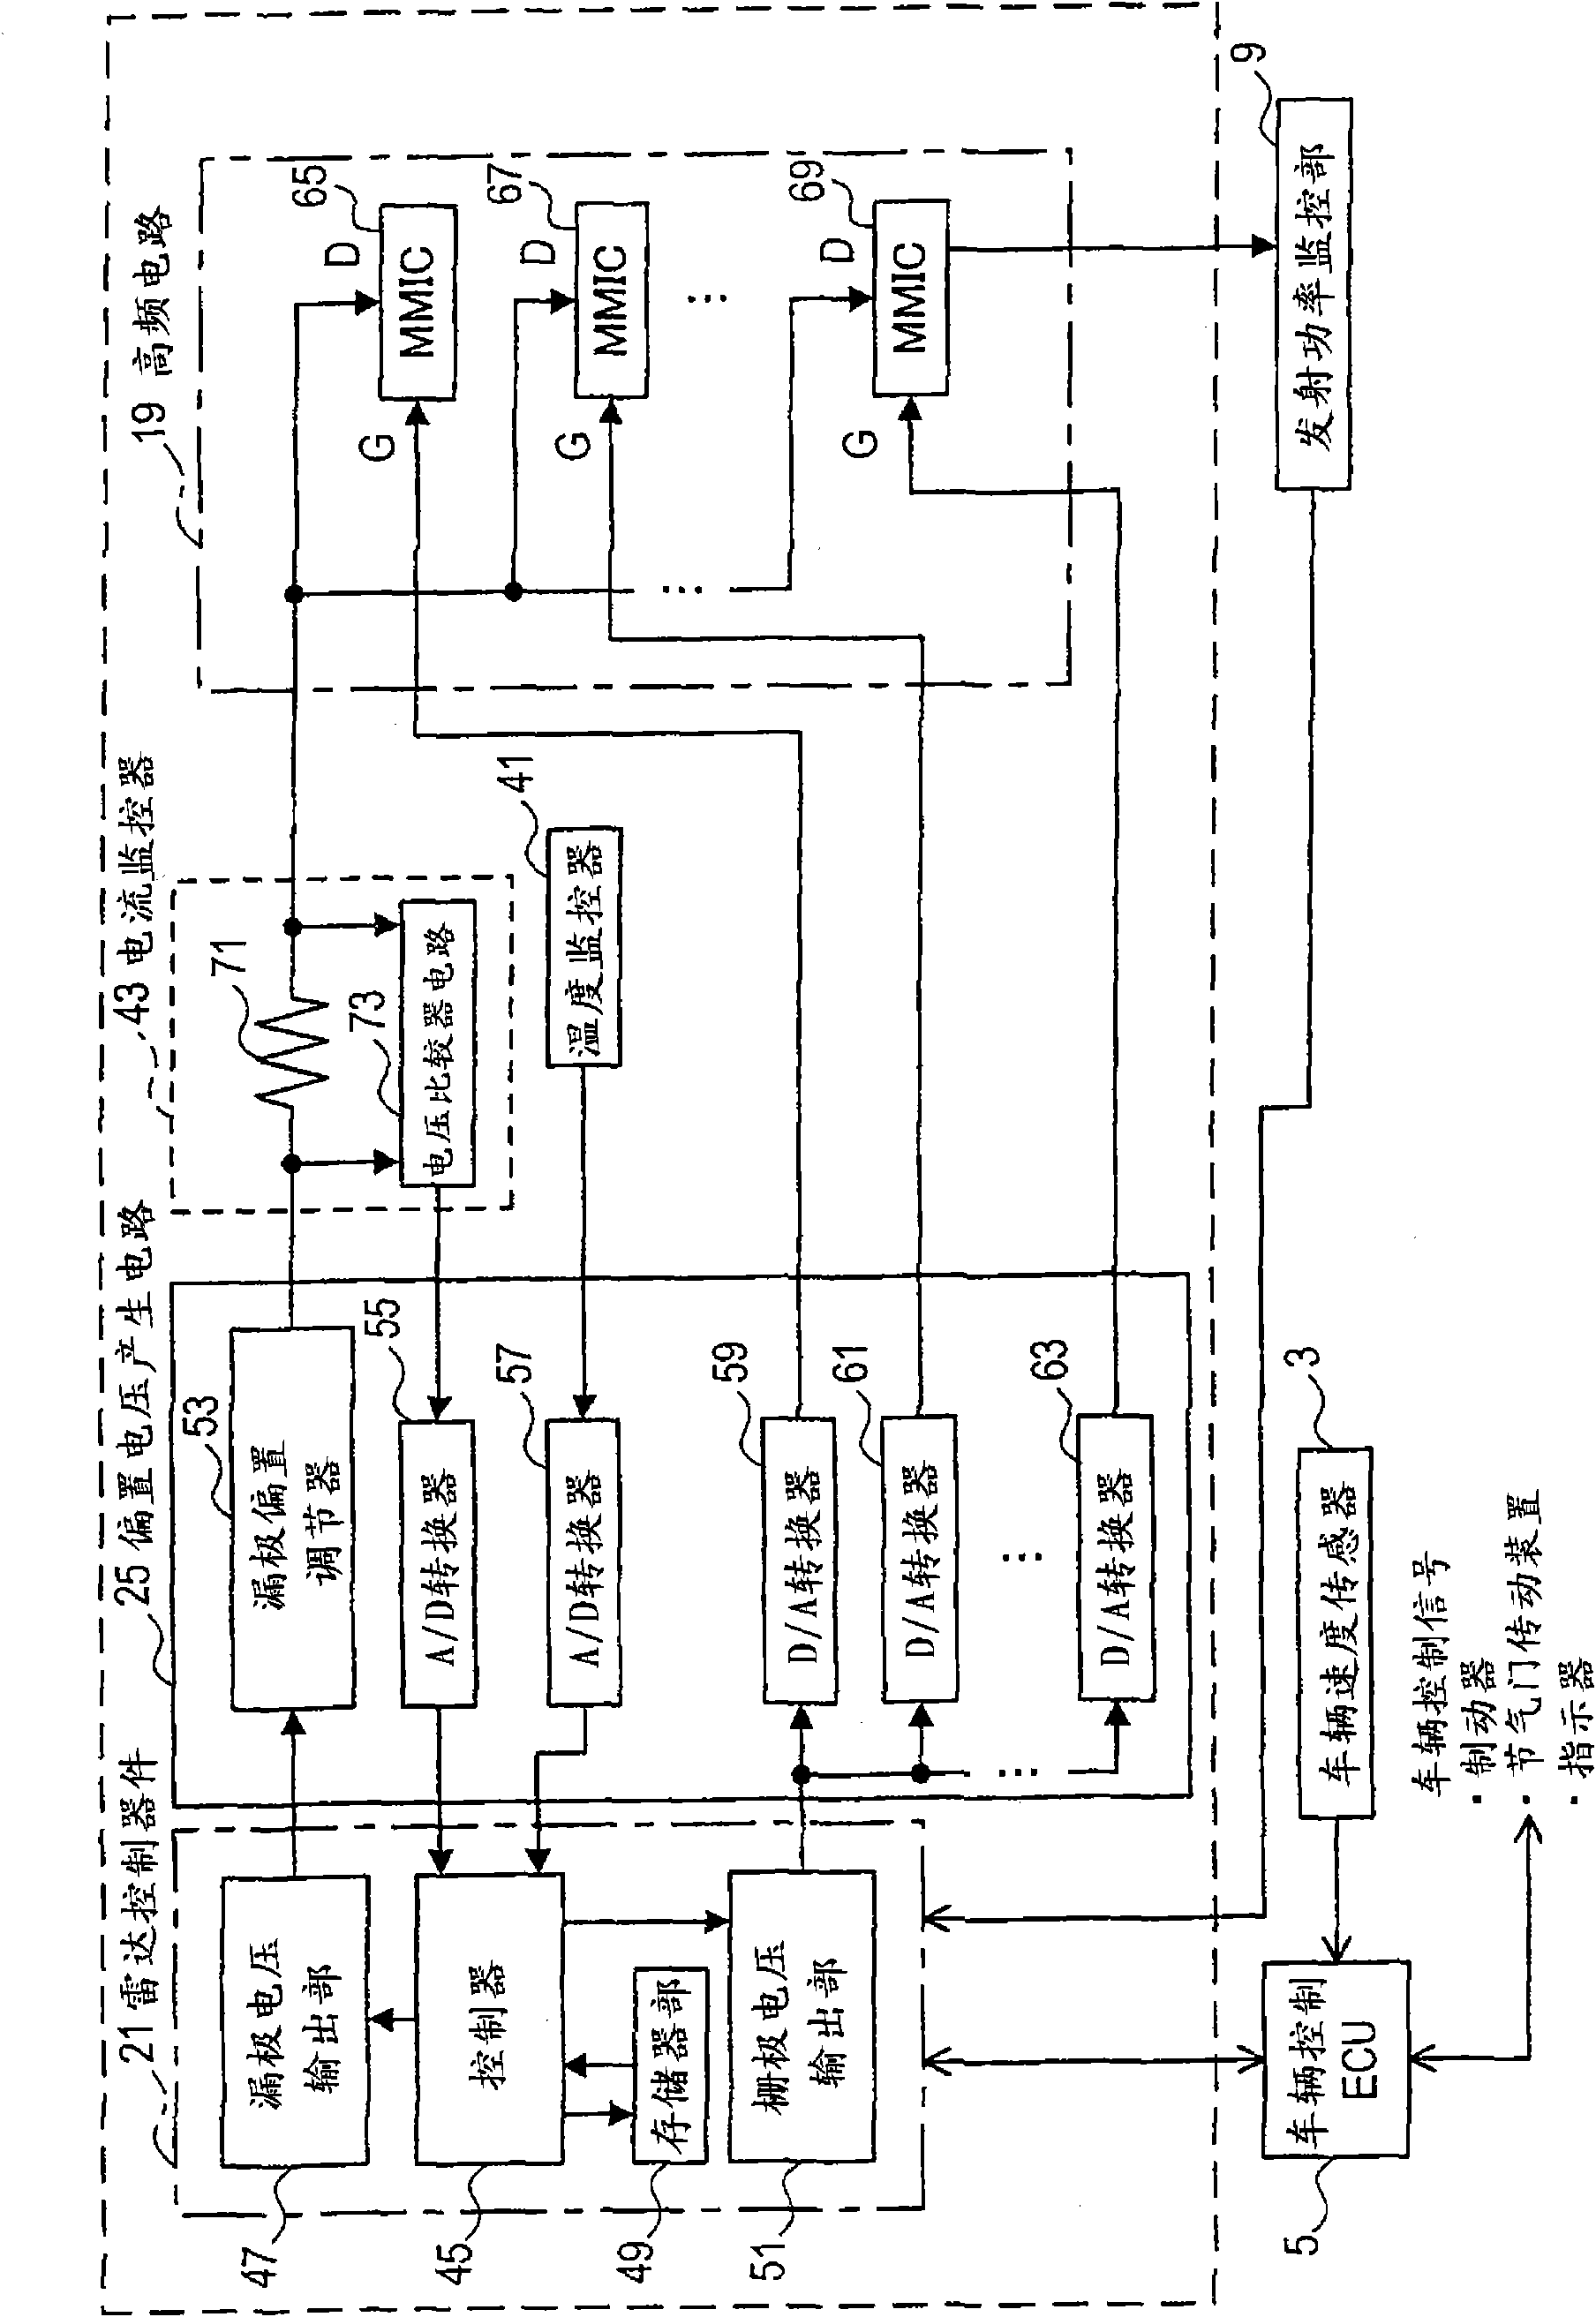 Vehicle radar apparatus having variable output power controlled based on speed of vehicle